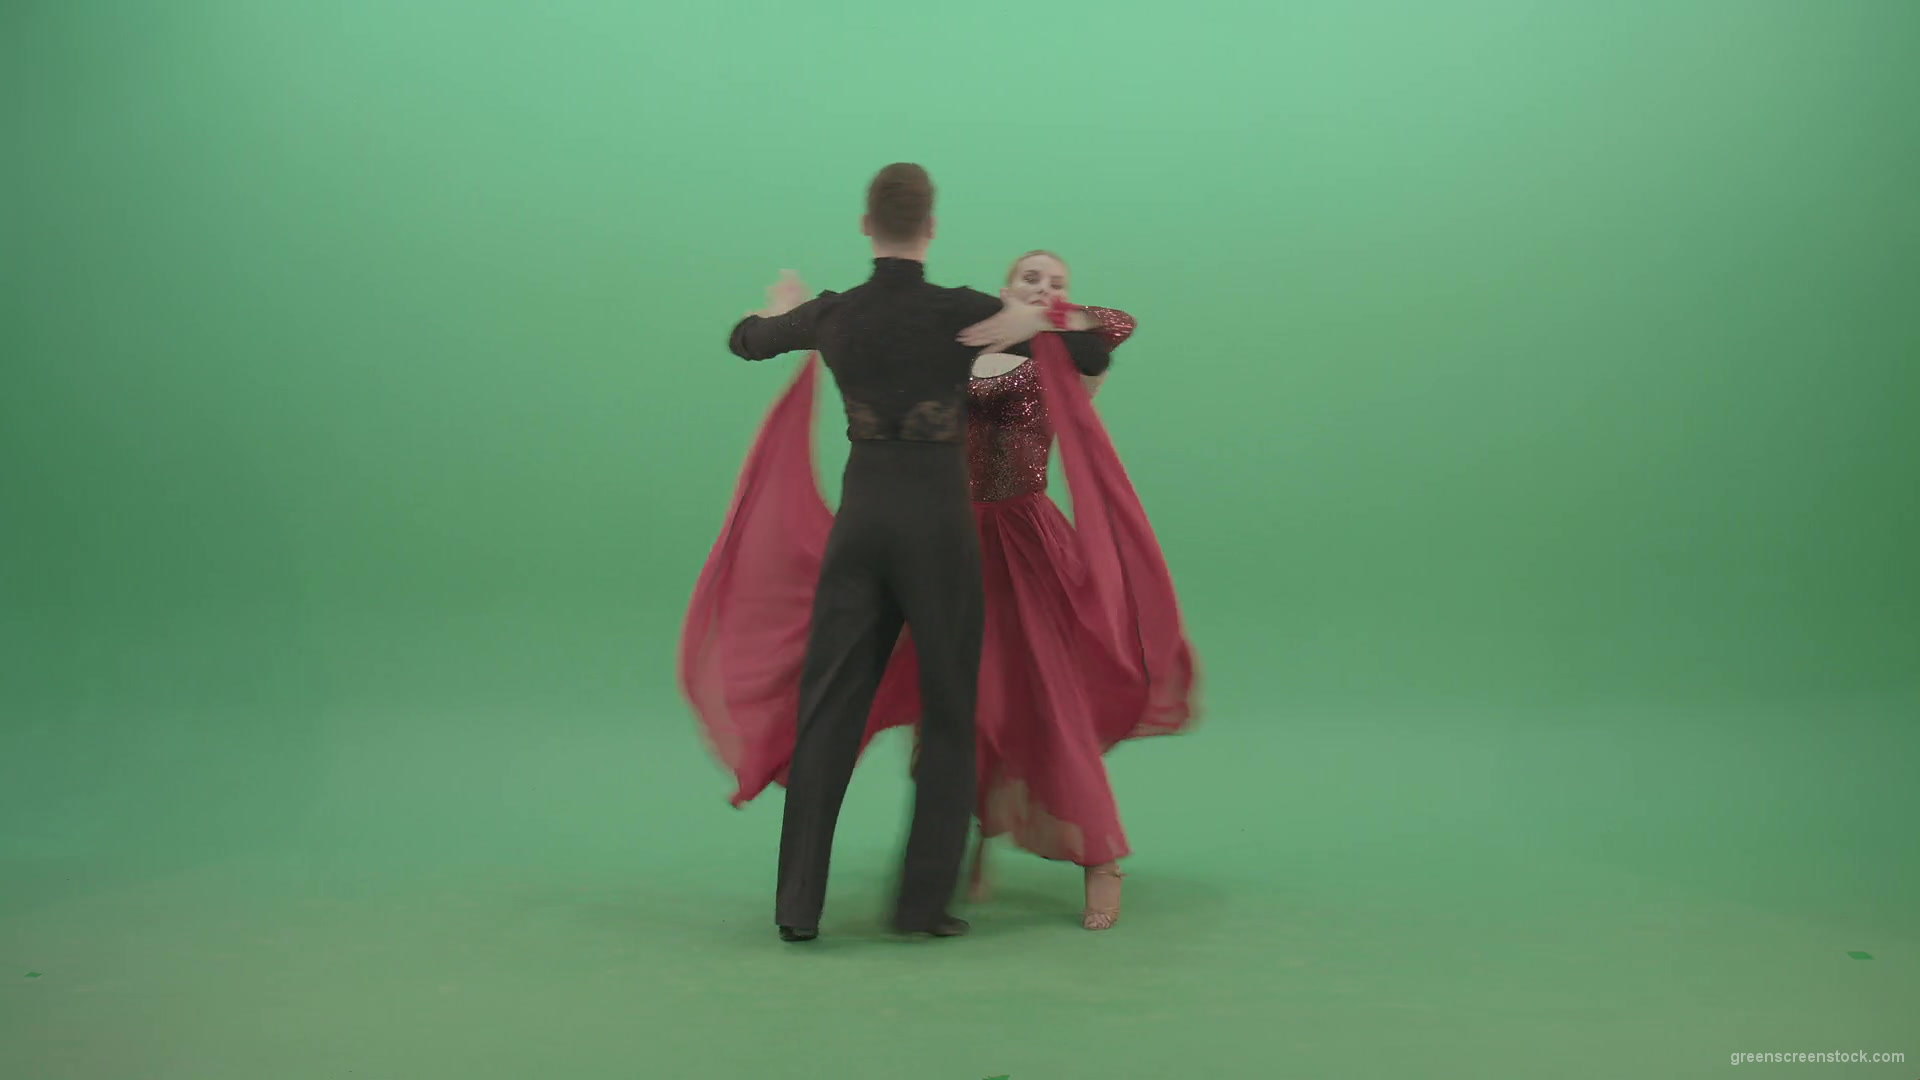 Young-couple-in-red-black-costume-spinning-dancing-ballroom-latina-dance-over-green-screen-4K-Video-Footage-1920_004 Green Screen Stock